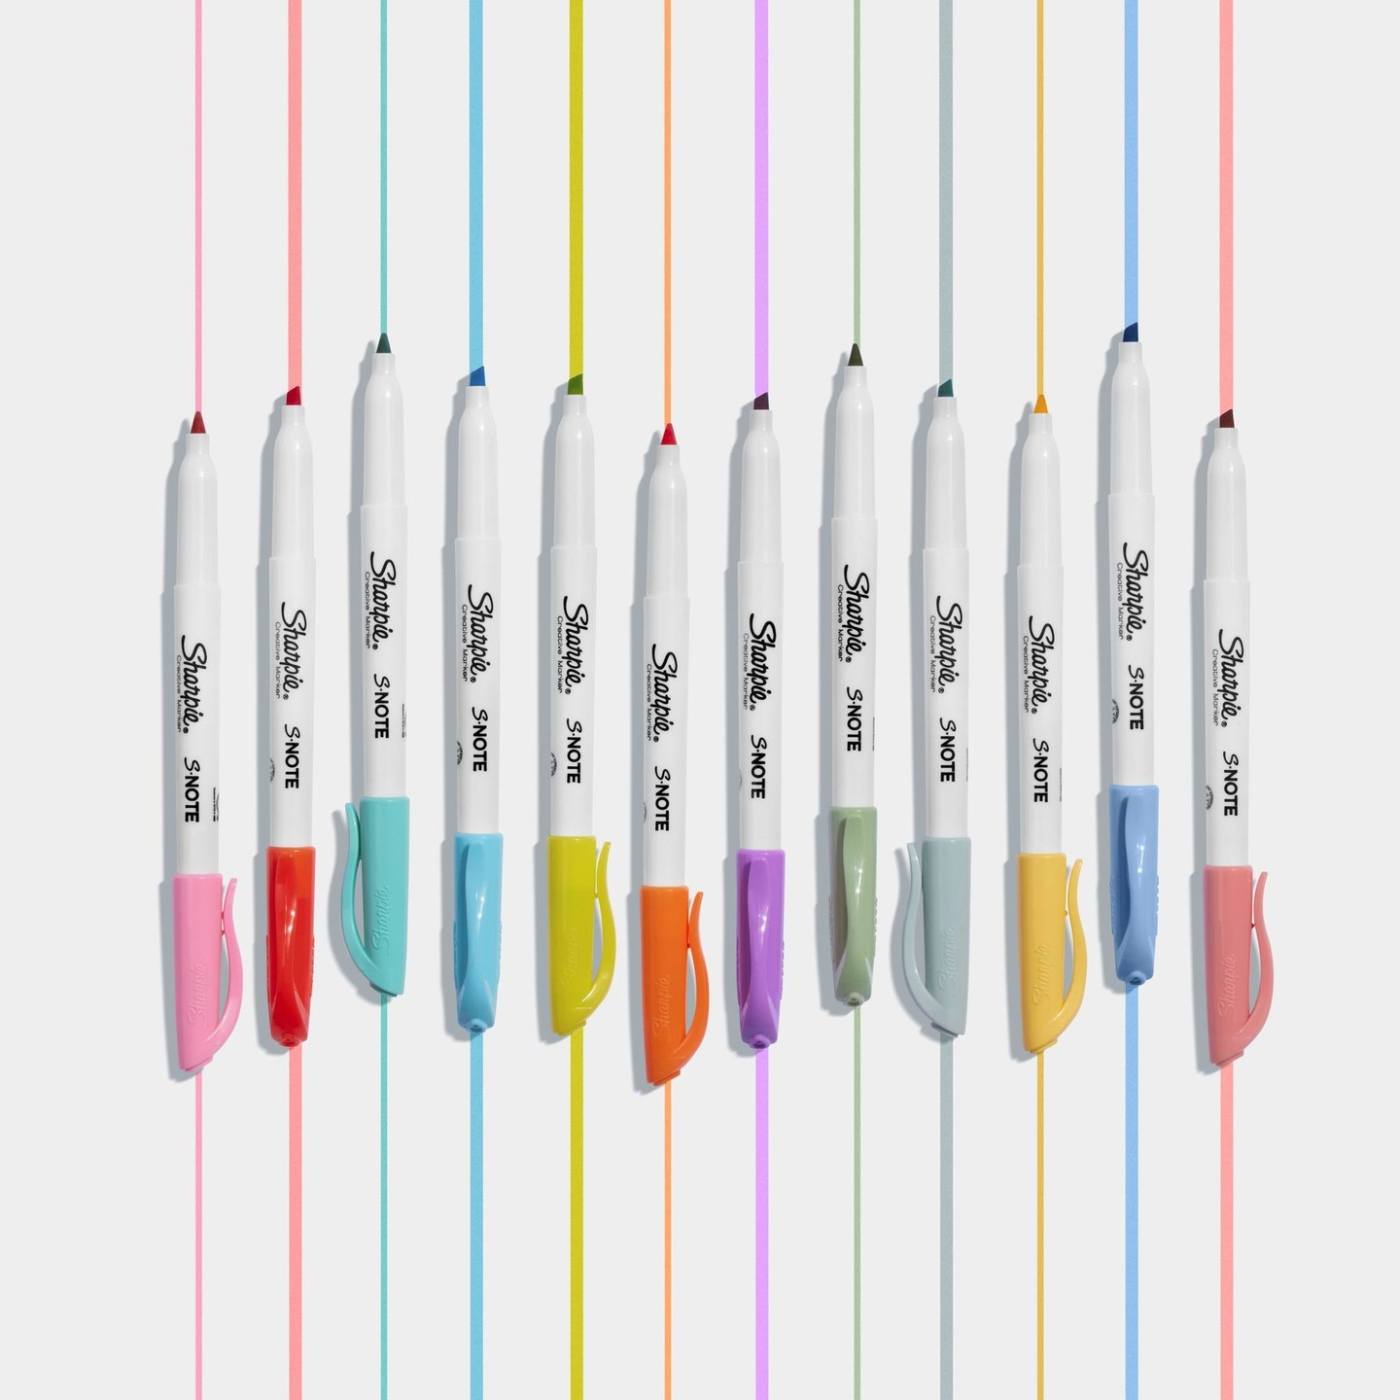 S-note 4-set in the group Pens / Artist Pens / Illustration Markers at Pen Store (125432)